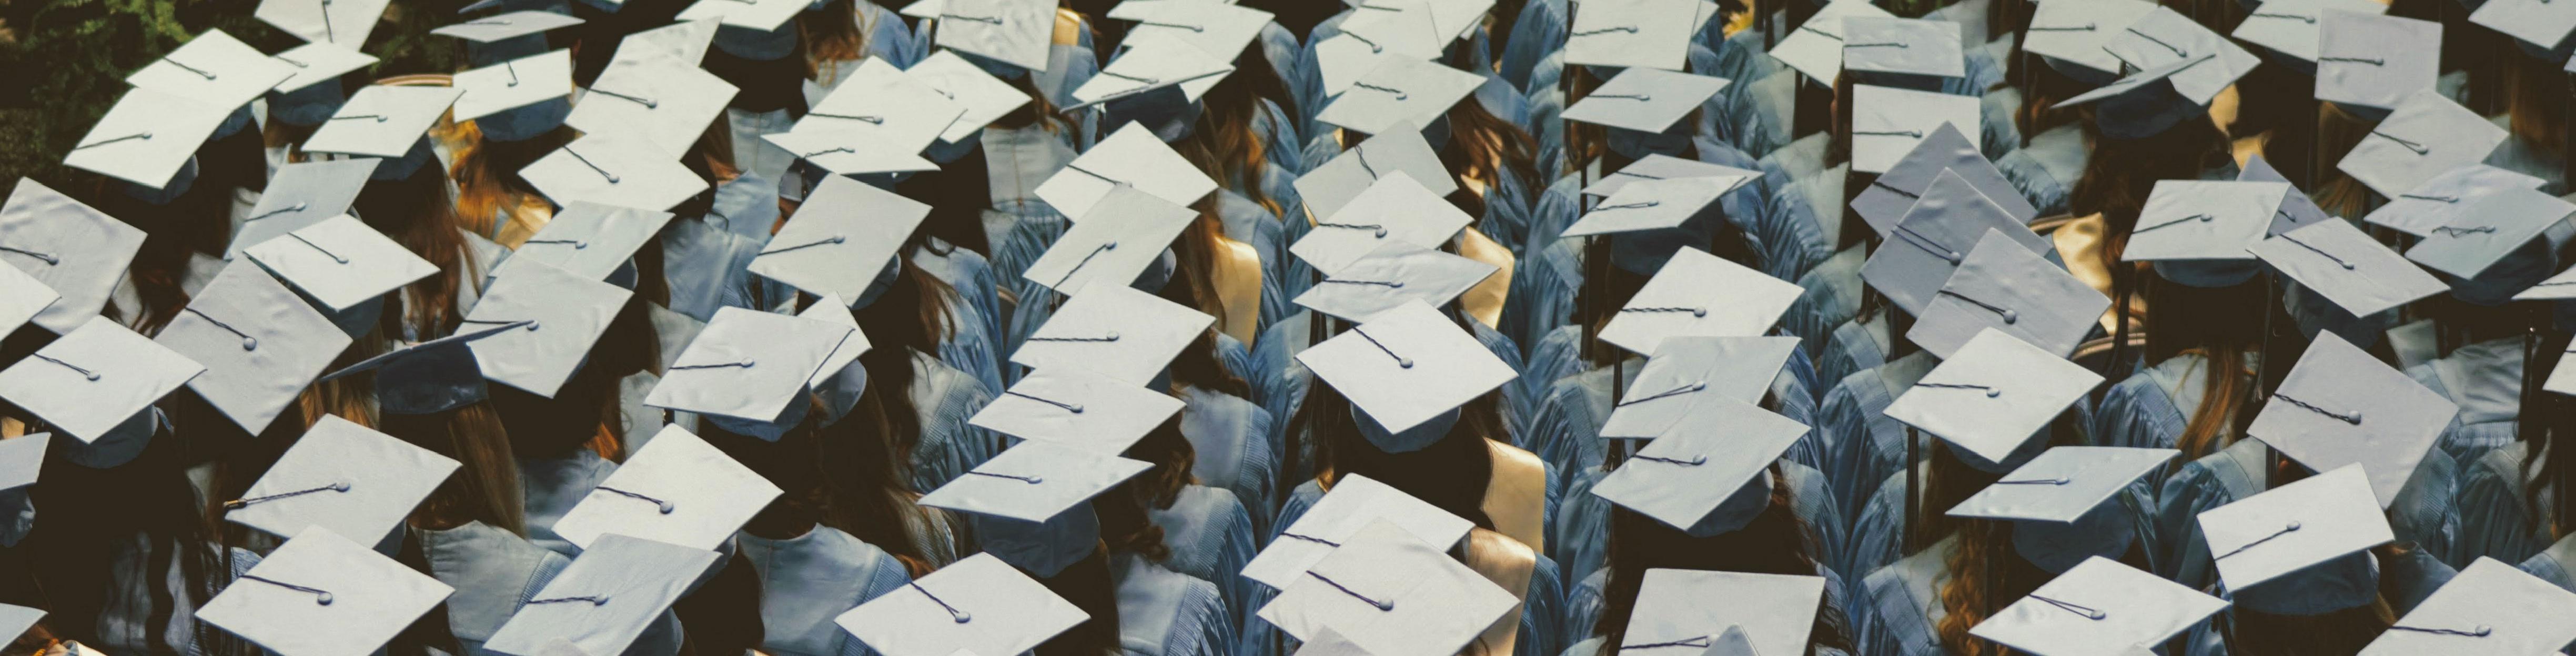 A large group of students wearing caps and gowns for graduation